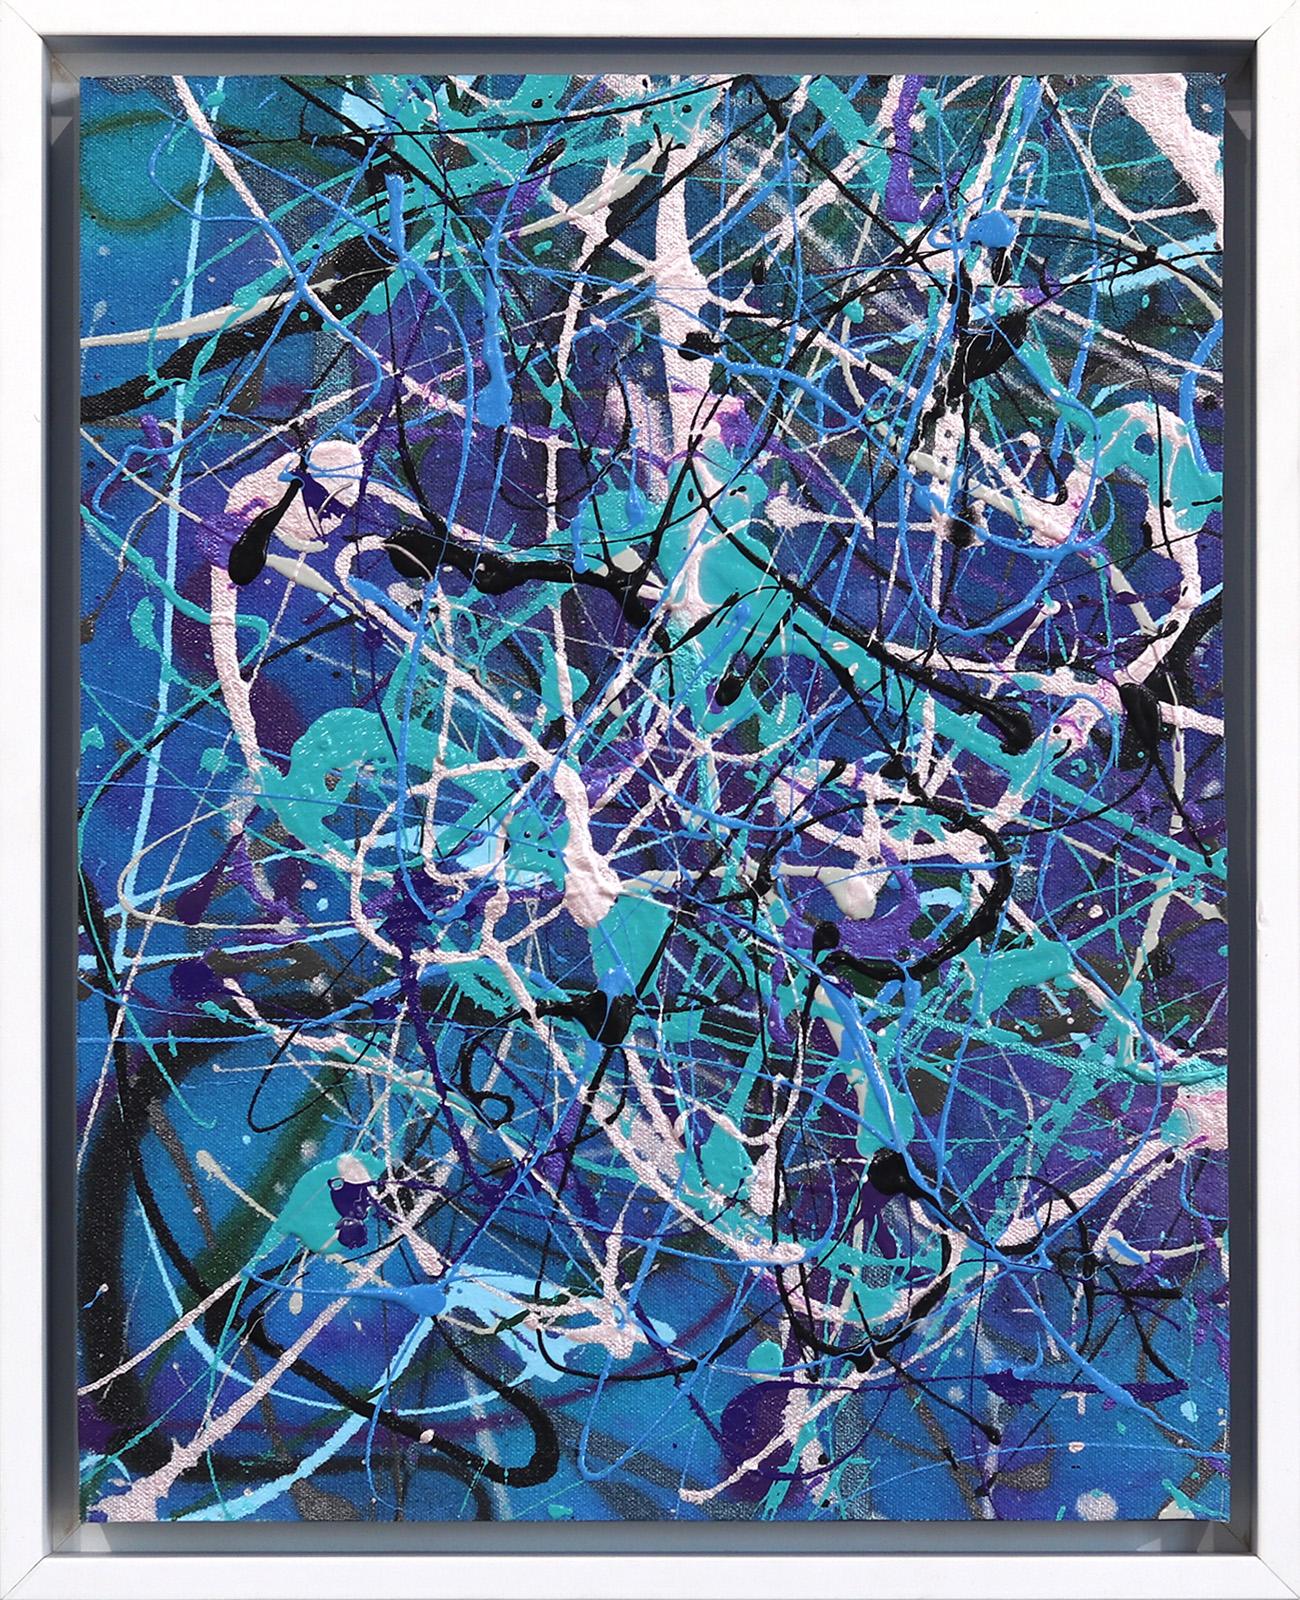 Marc Raphael Abstract Painting - Deconstructed Blue #4 - Unique Expressionist Action Painting